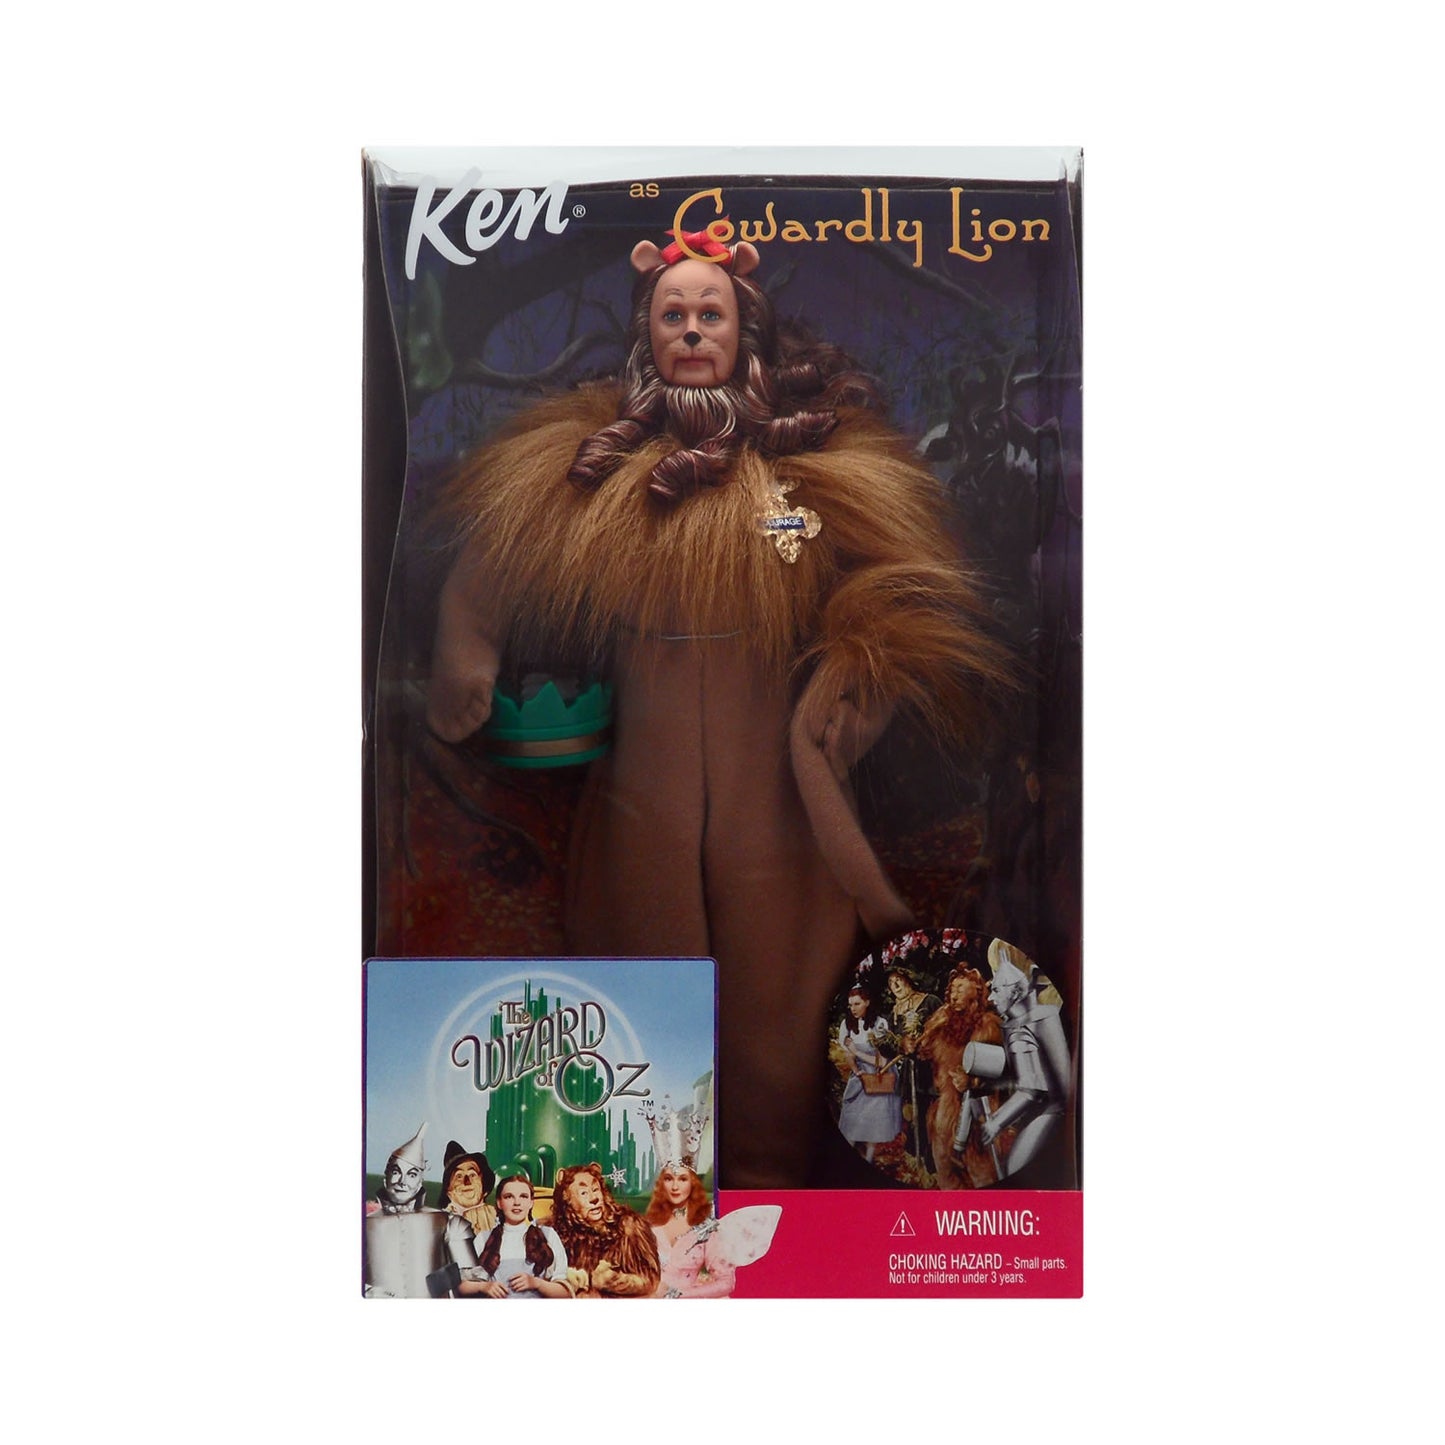 Ken as the Cowardly Lion from the Wizard of Oz